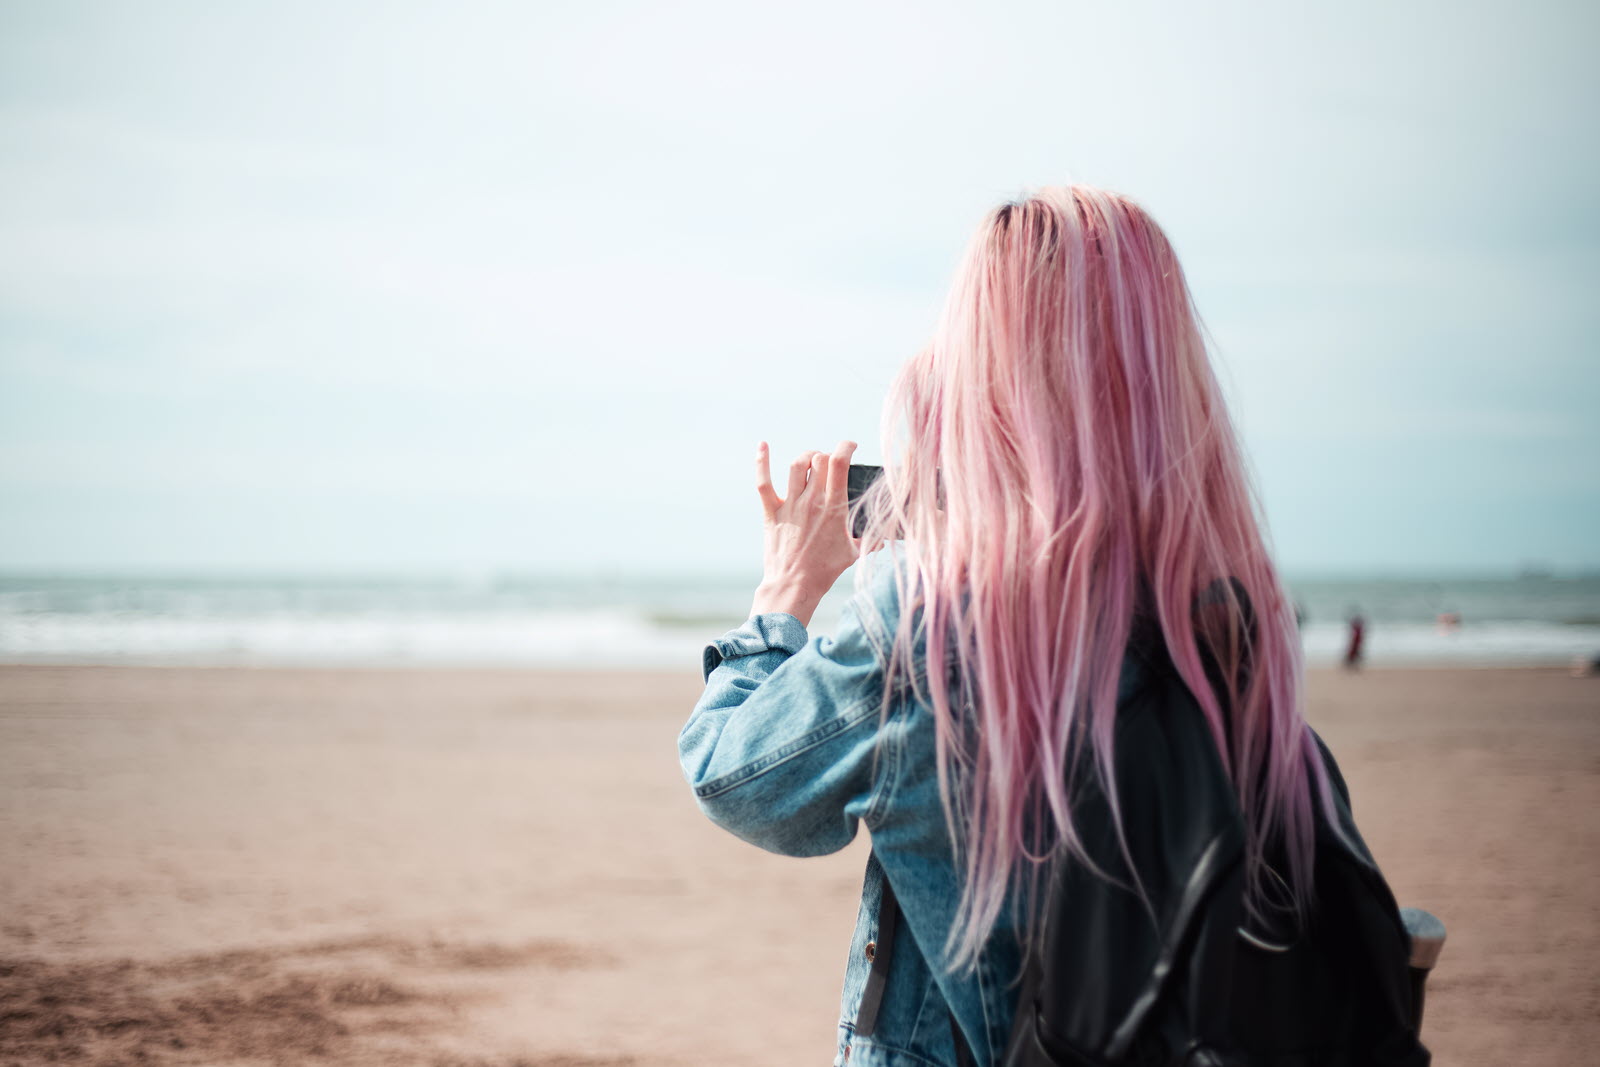 Pink-haired woman on beach taking photo of shoreline